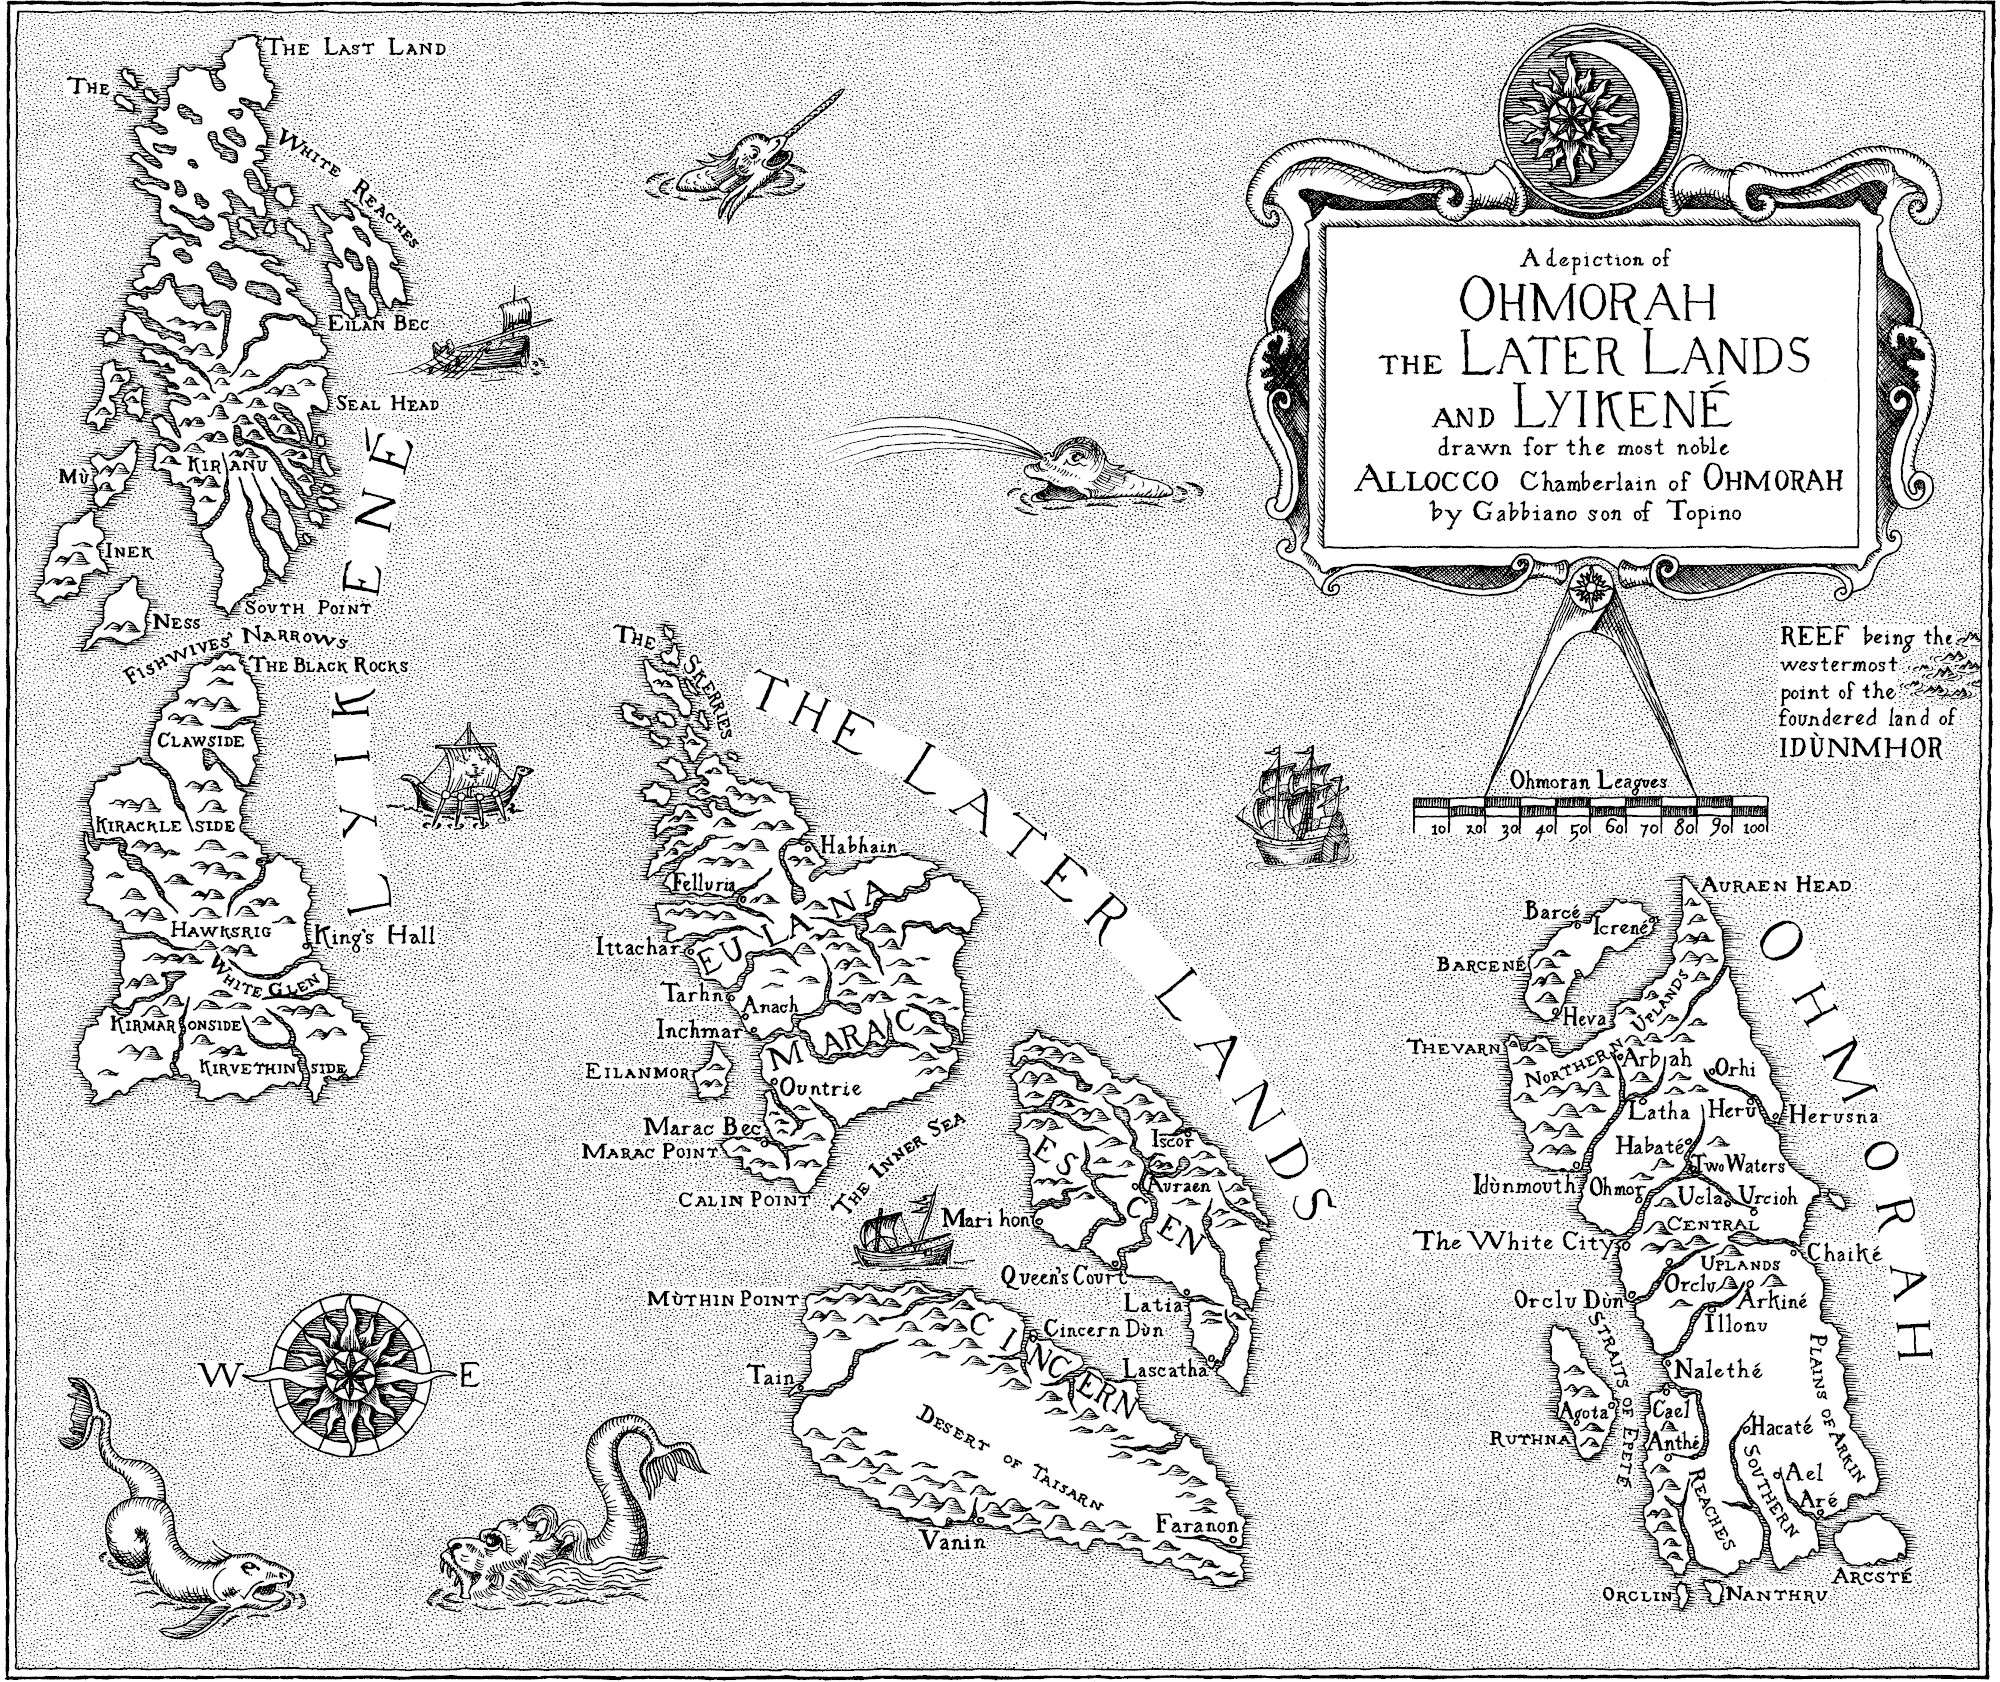 Map of Ohmorah, the Later Lands and Lyikené